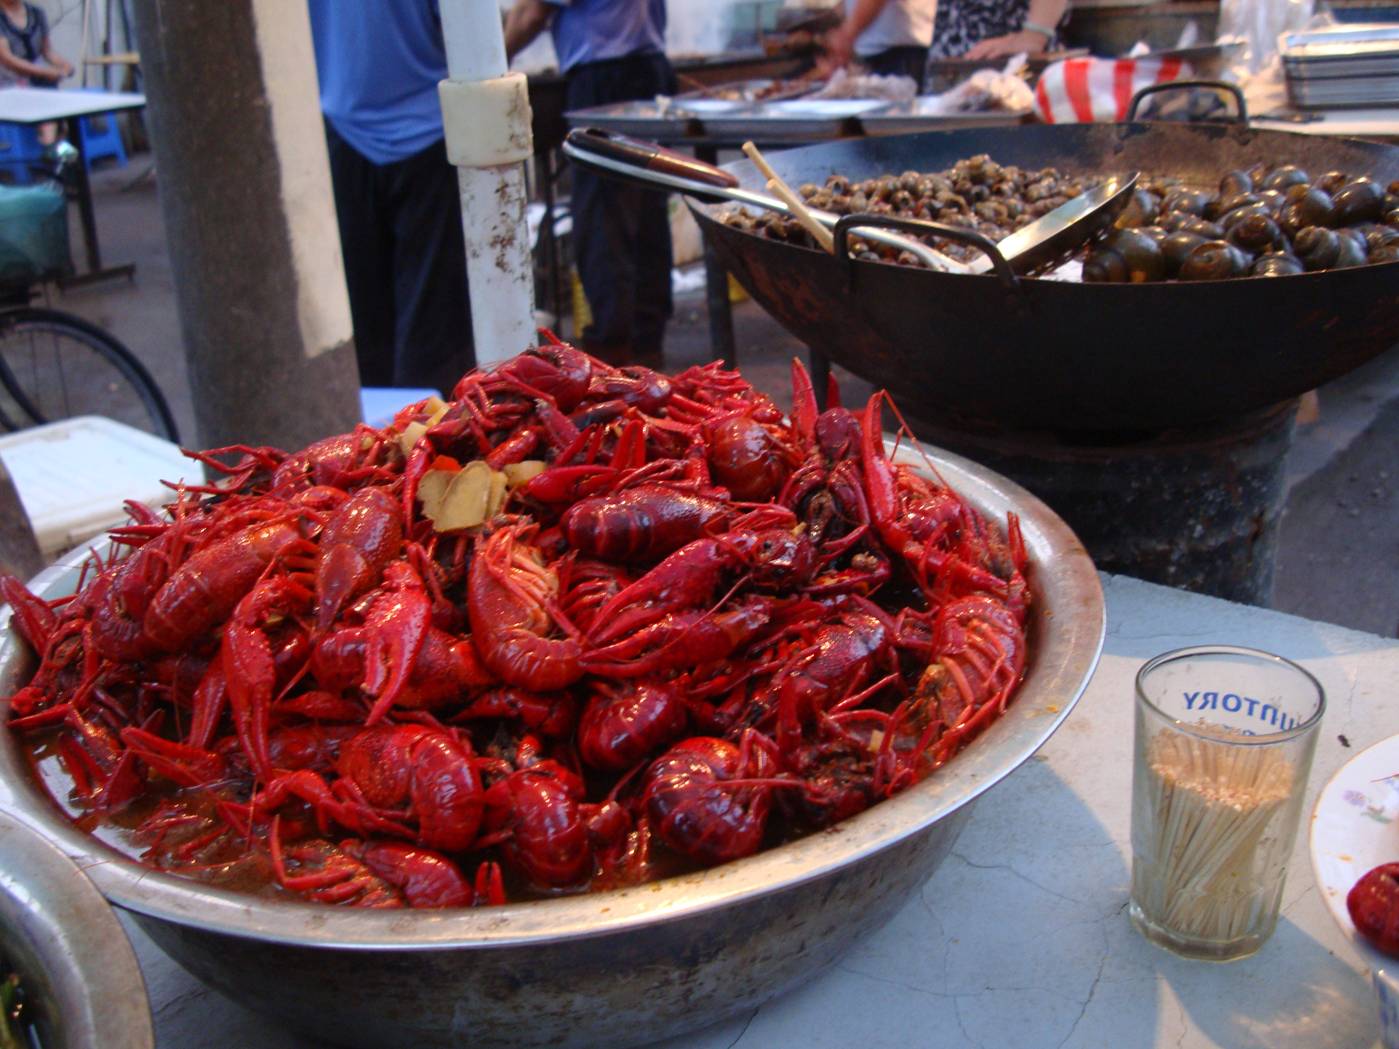 Picture:  I find the crawfish too picky to be worth the trouble, but thousands disagree.  Street food in Shi Tang Cun, Wuxi, China